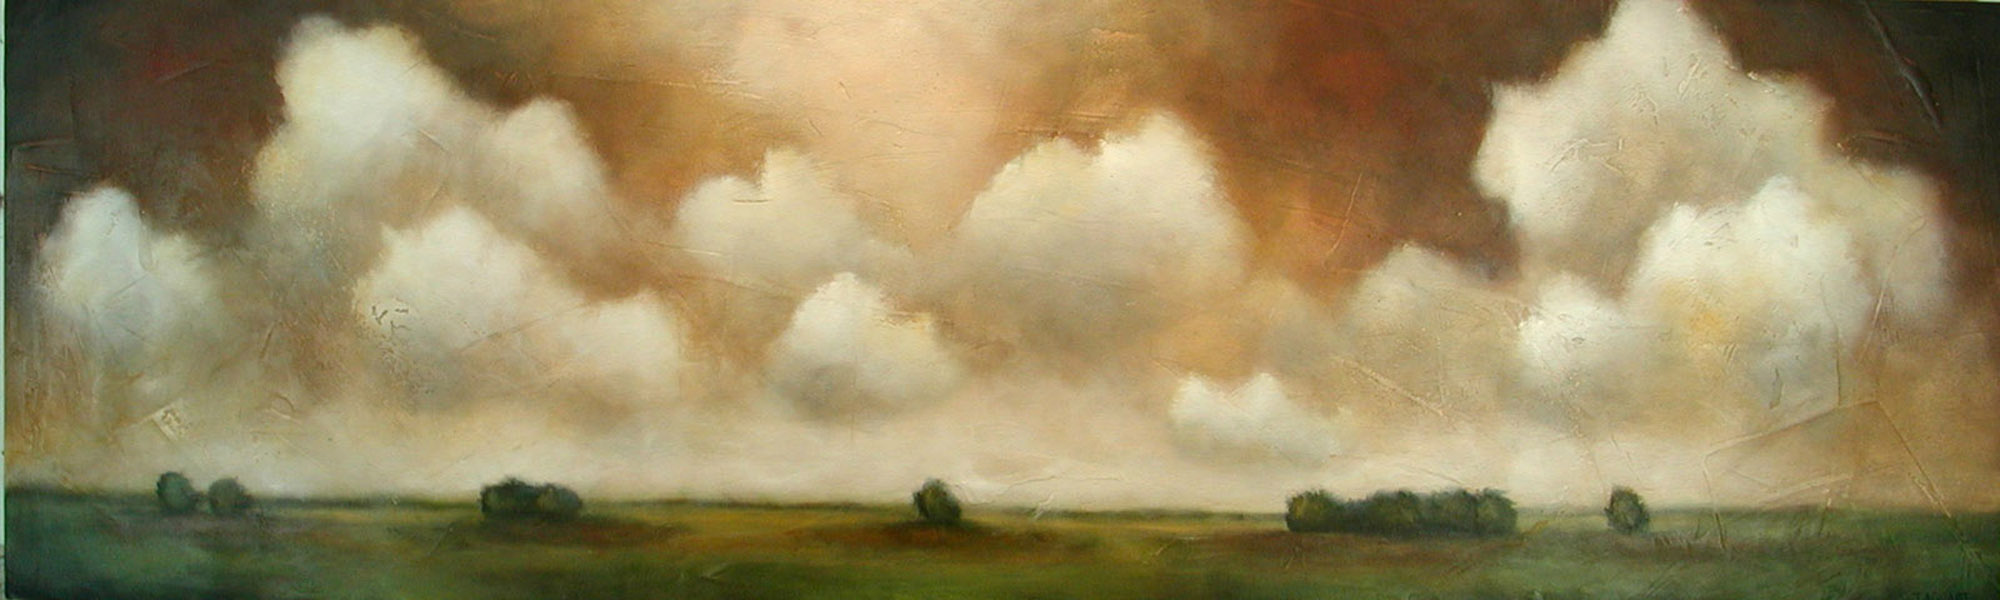 From the Ground Up, 16''x50''.jpg